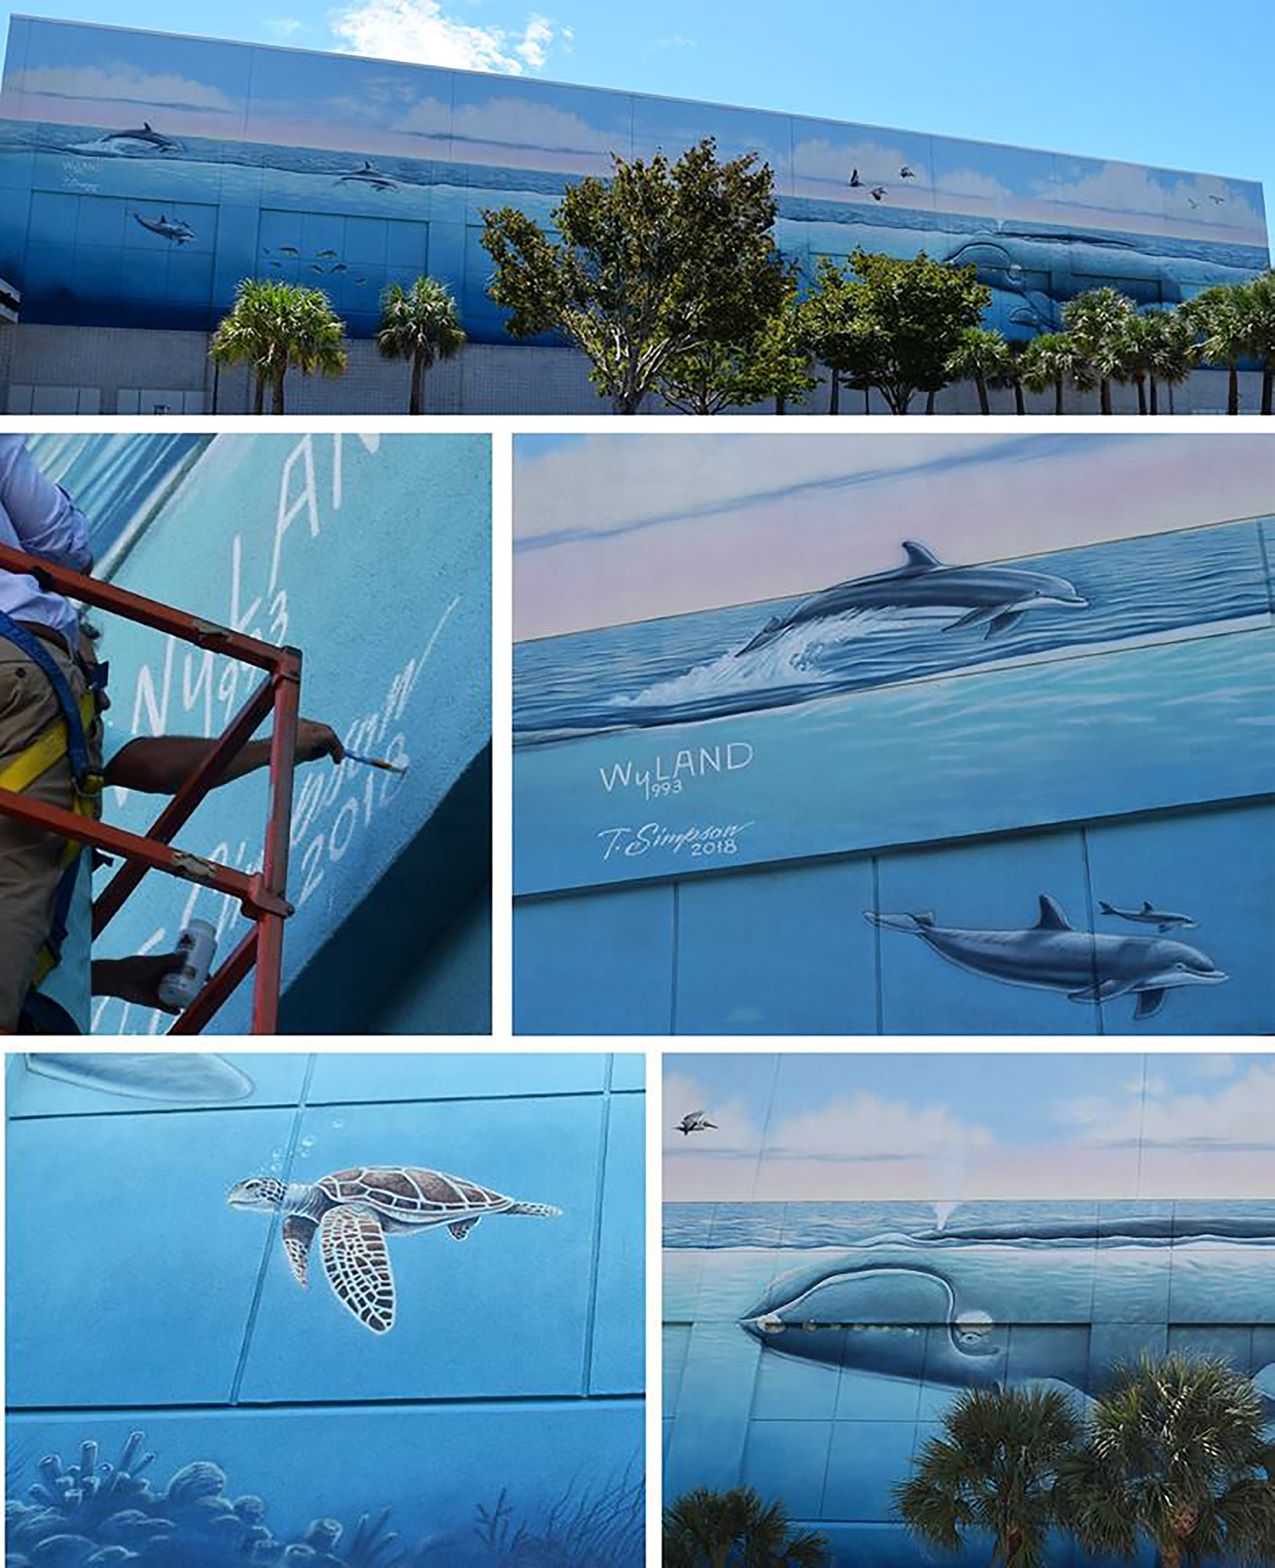 The "Whaling Wall" mural at Myrtle Beach Convention Center